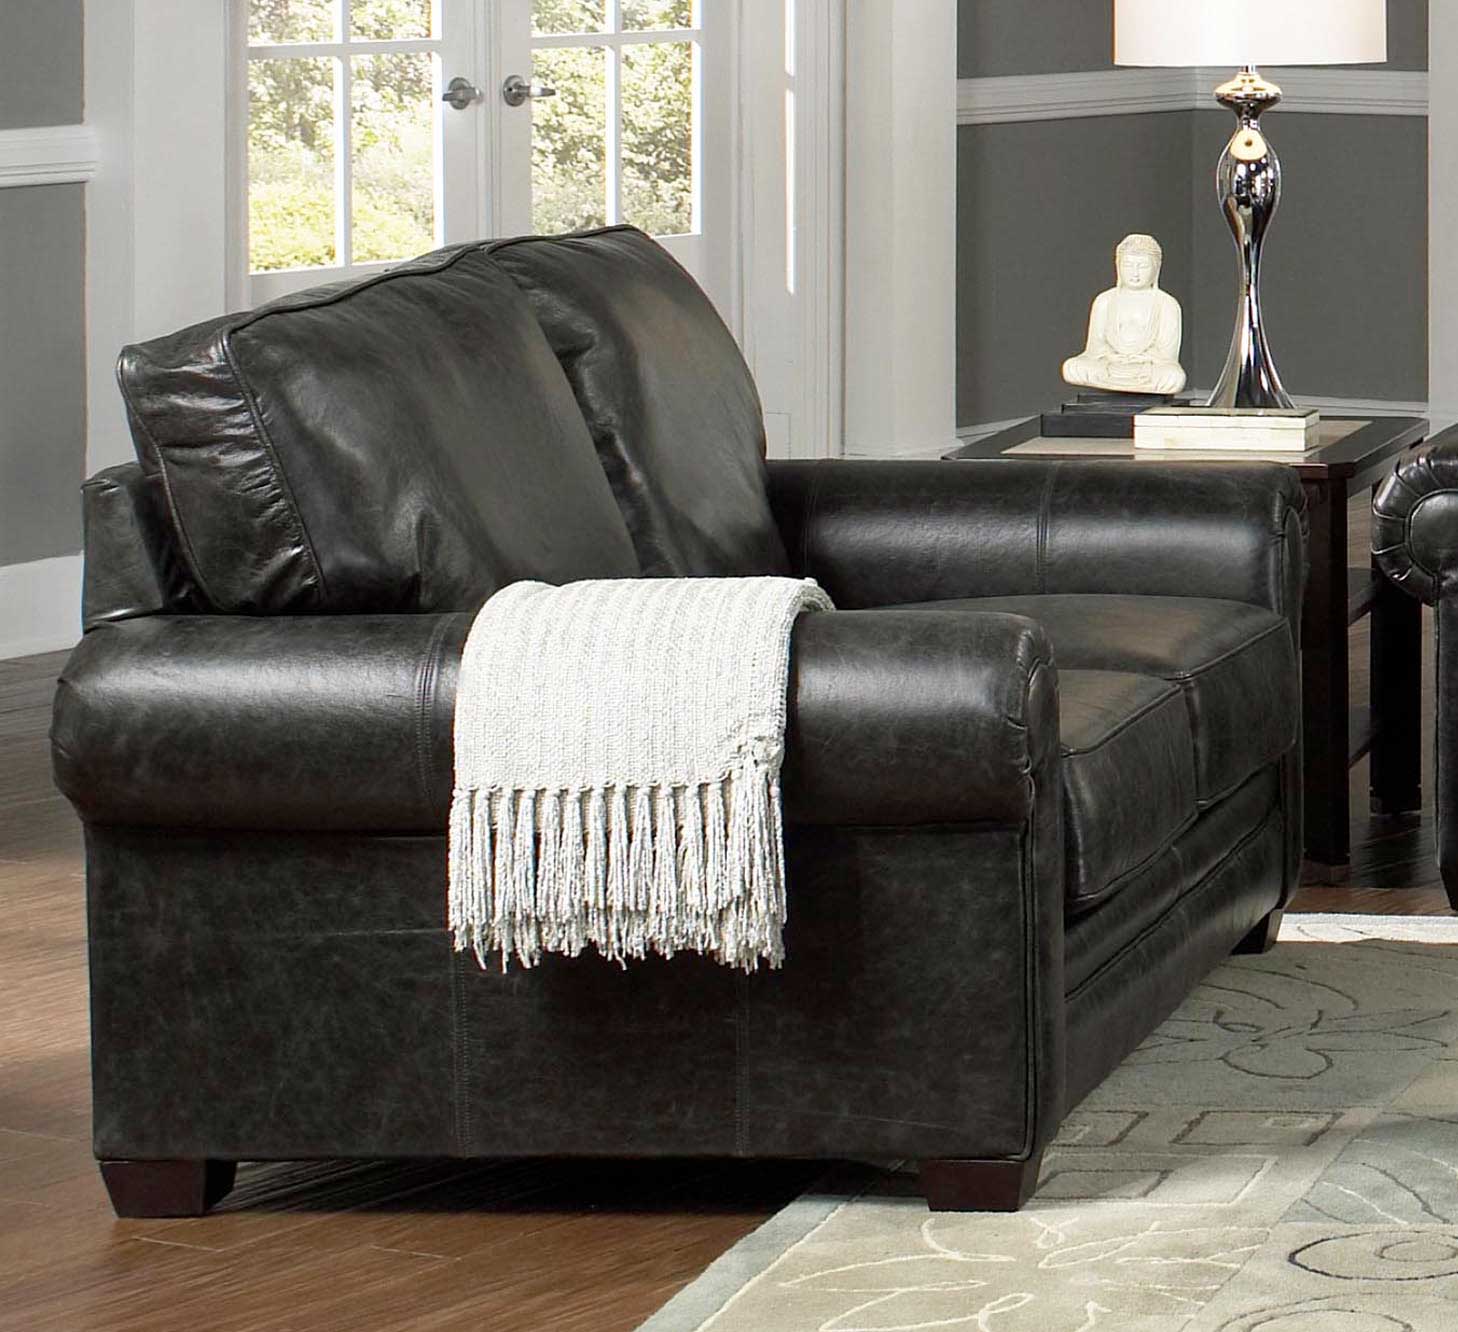 Jackson Channing Loveseat - Stone Color Leather